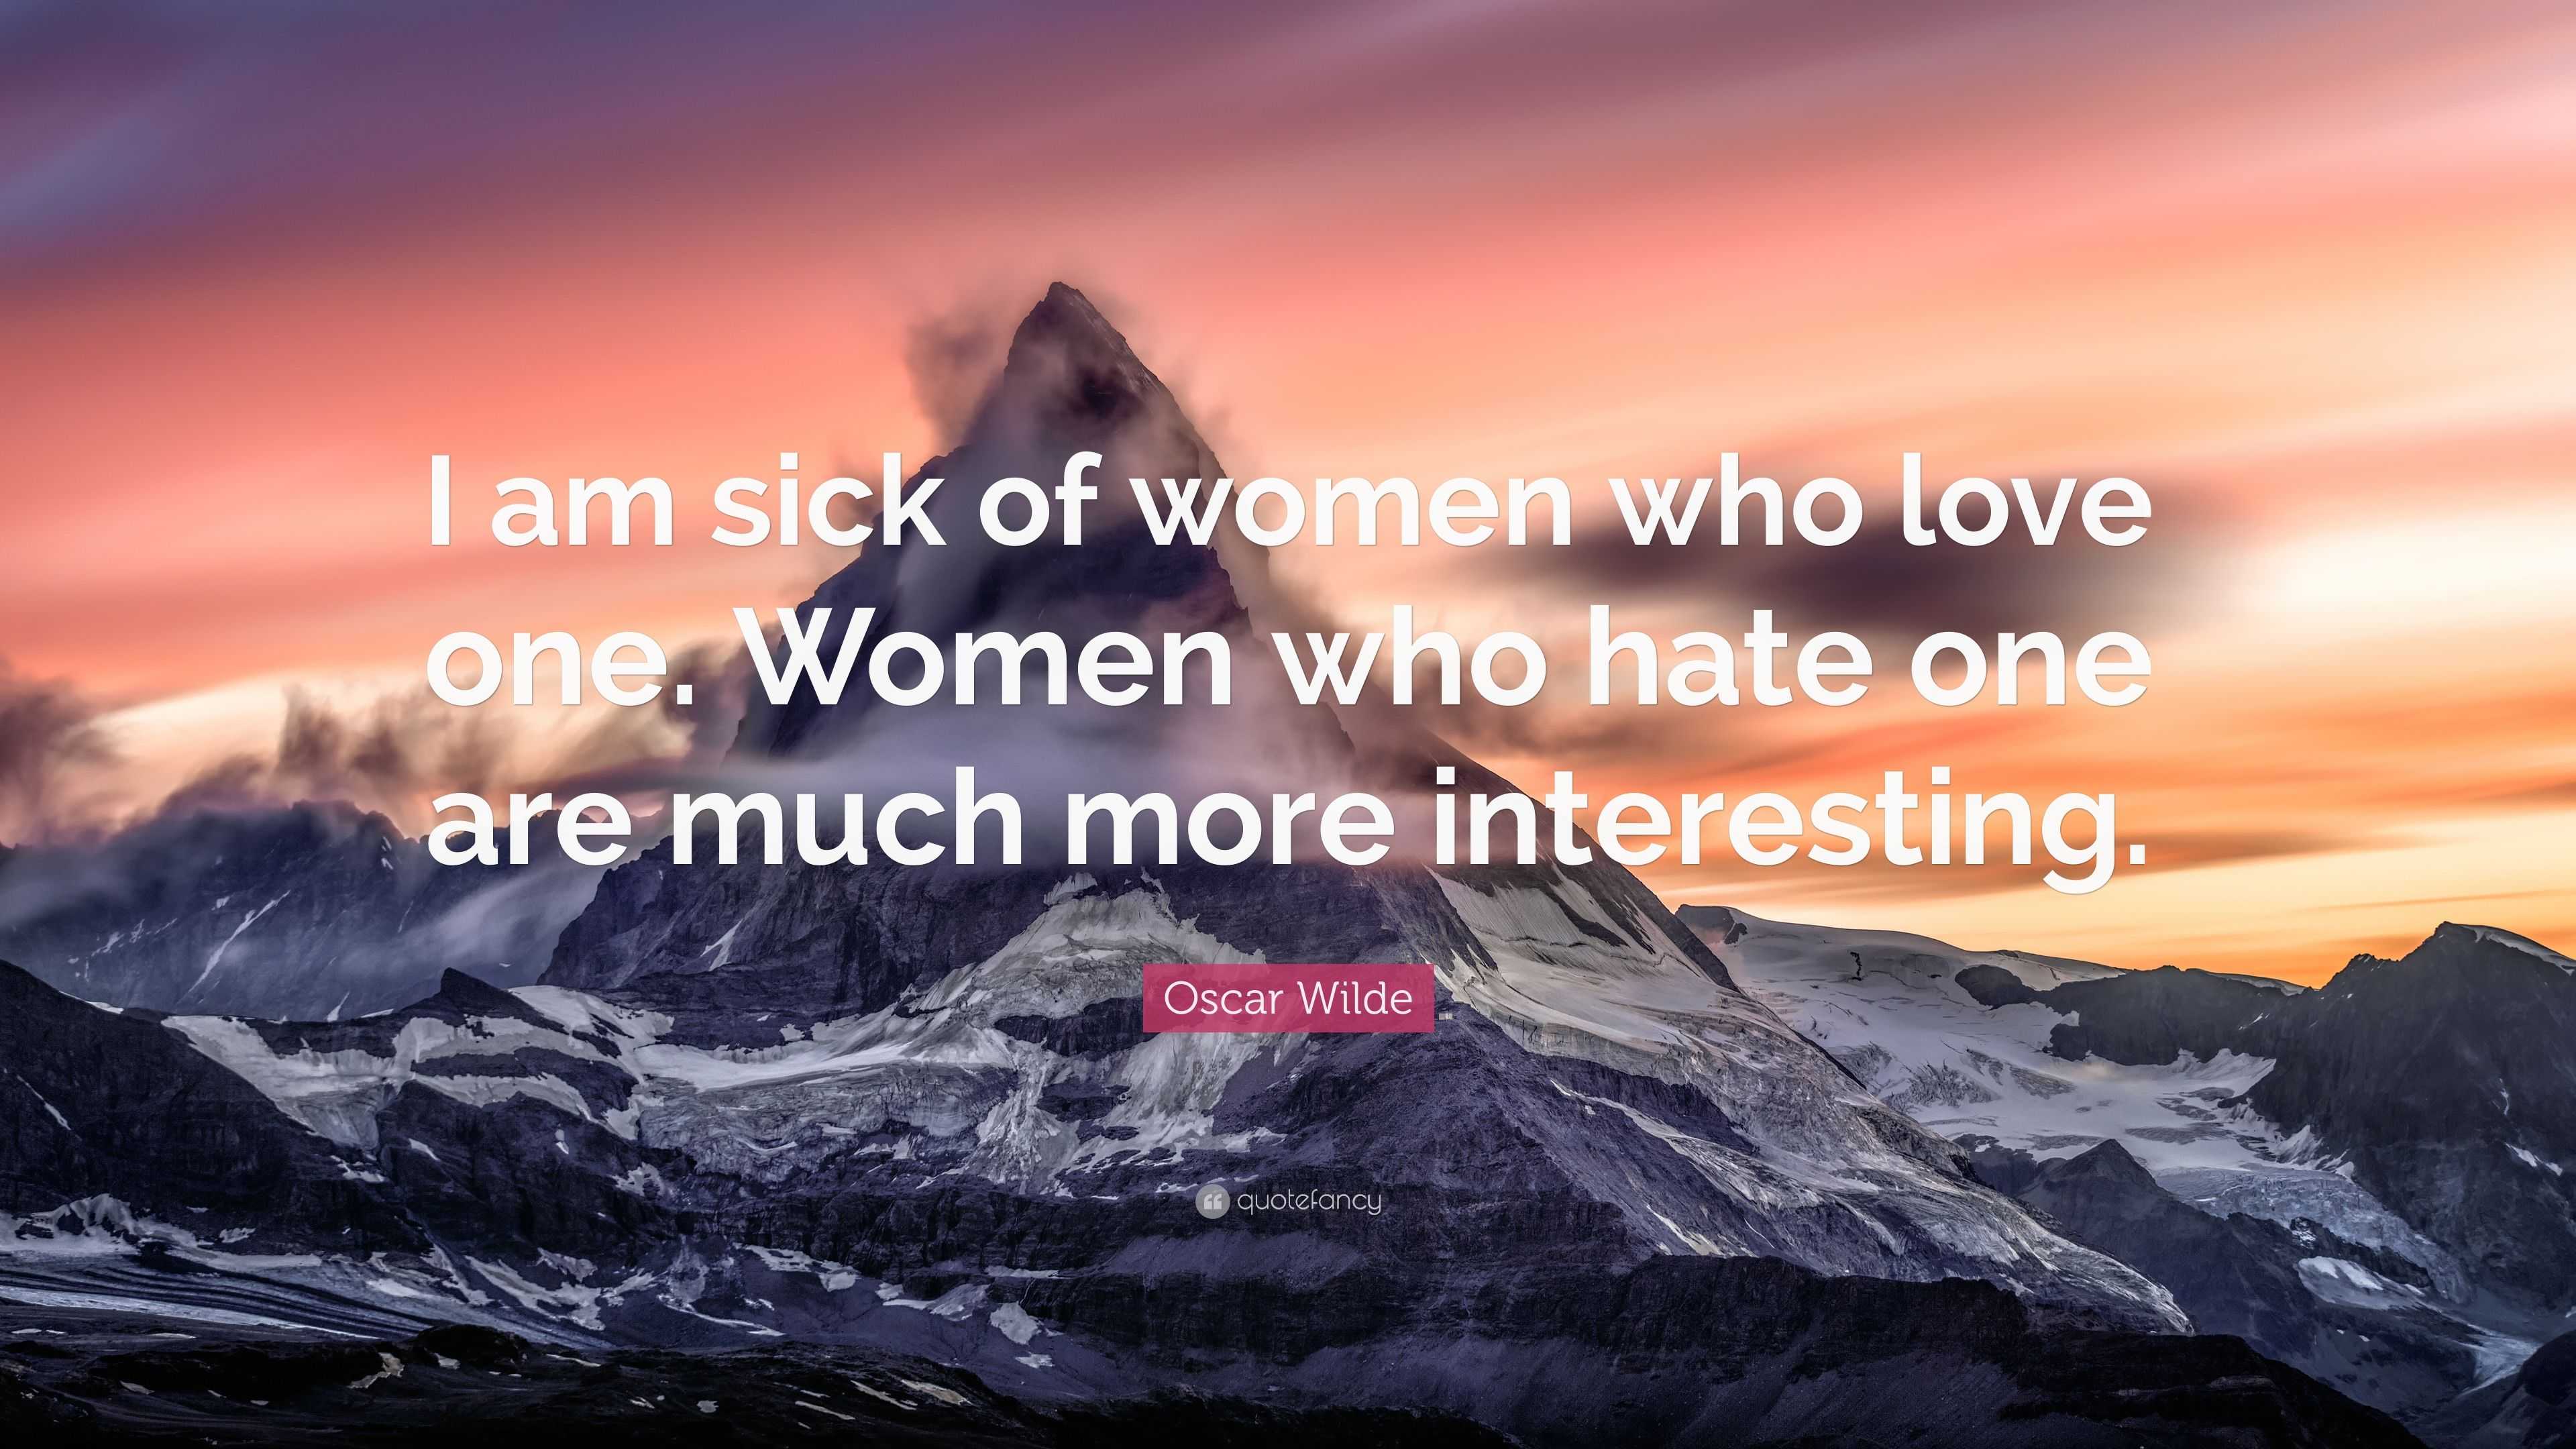 Oscar Wilde Quote “I am sick of women who love one Women who